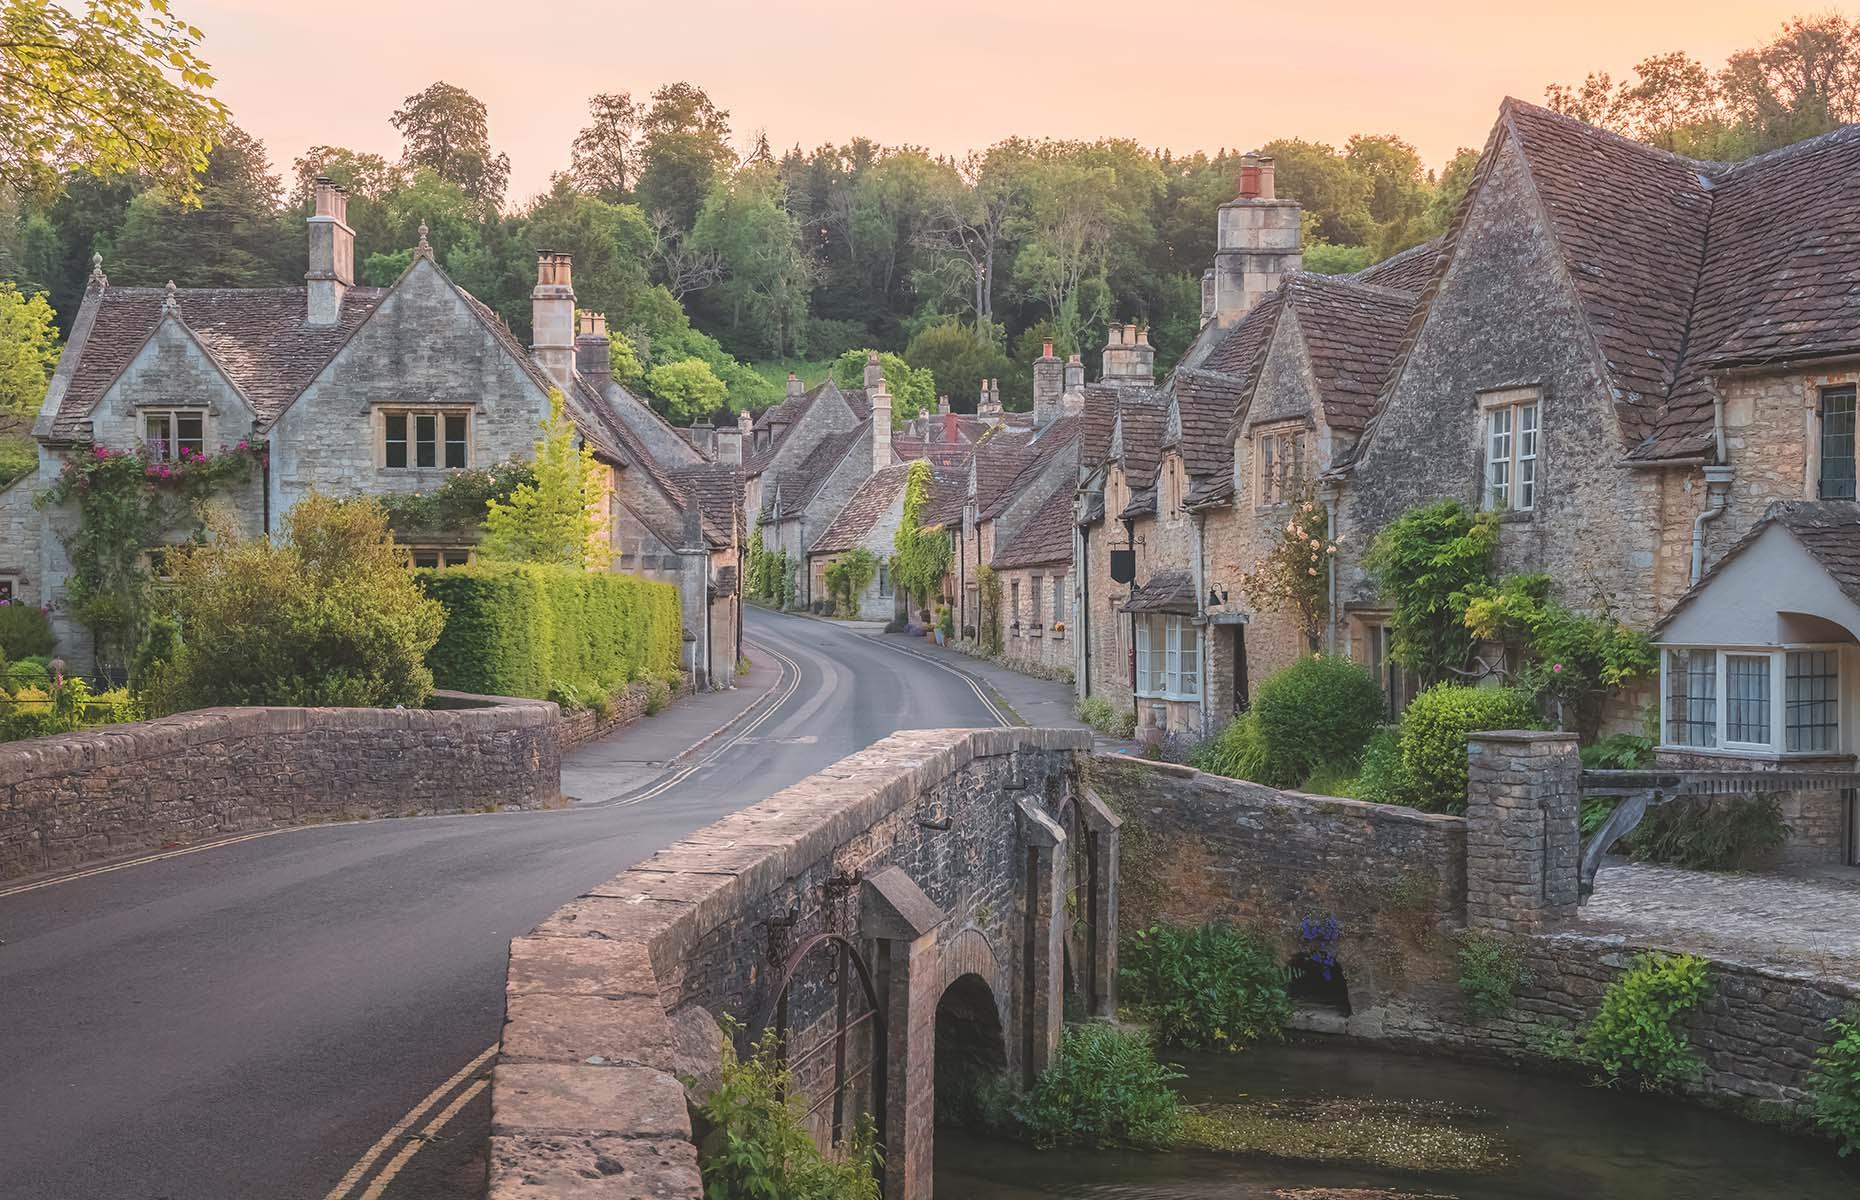 <p>With its characteristic Cotswolds stone buildings and winding countryside roads, it’s no wonder Castle Combe has often been called the prettiest village in England. The historic site was first settled by Celts in ancient times, before becoming a regional hub for the wool industry during the Middle Ages. Many of its landmarks, including a market cross, an old water pump and the Church of St. Andrew, were built during this period.</p>